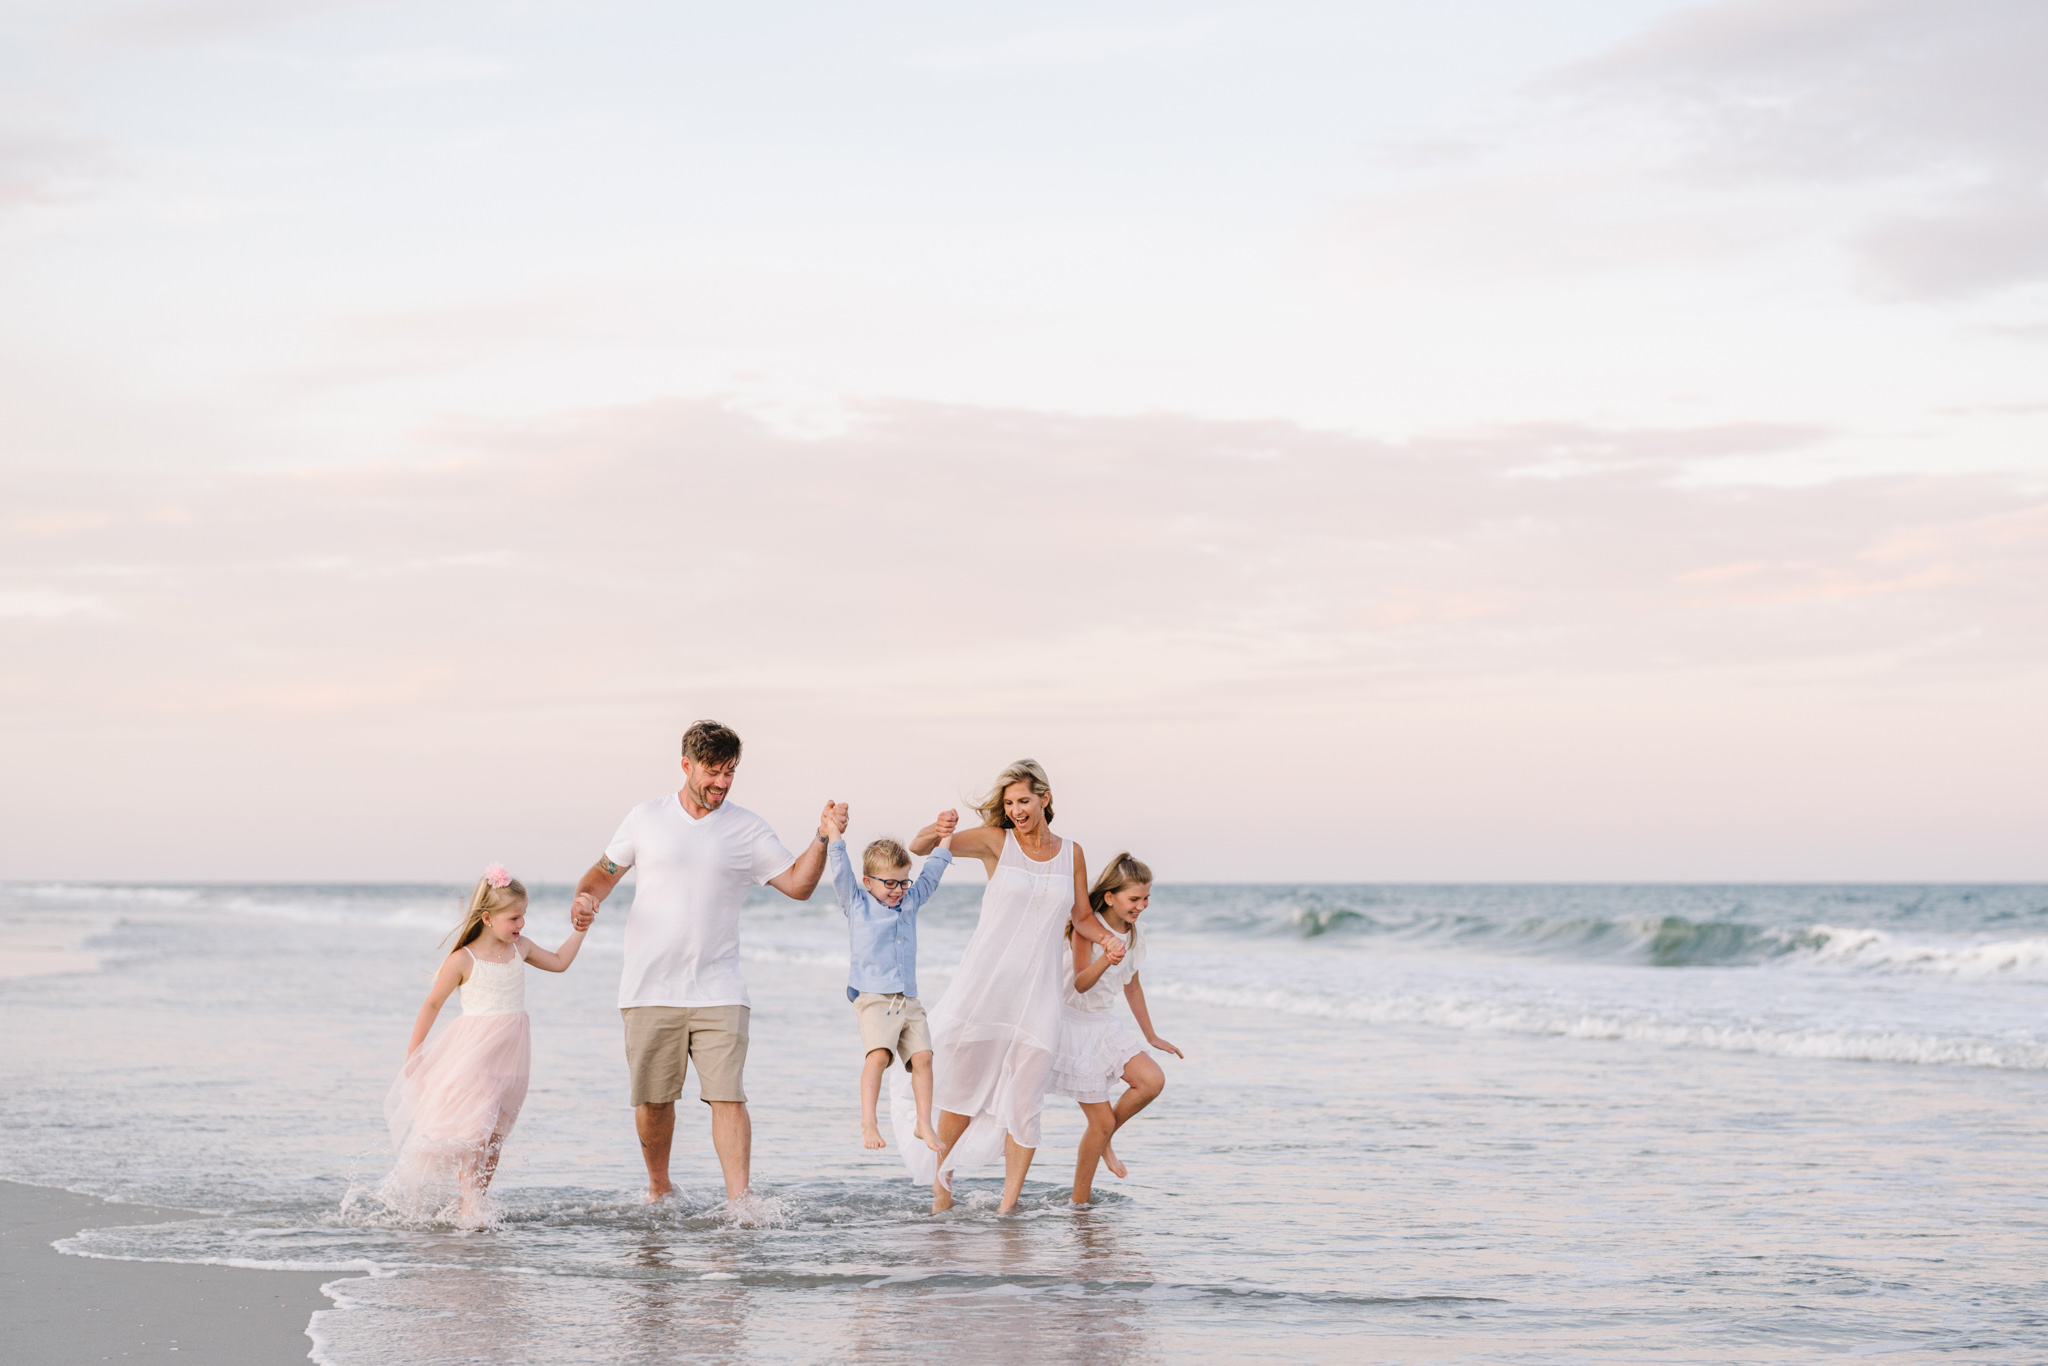 Myrtle Beach Family Photoshoot Ideas & What to Wear for Beach Session by Natallia Belman